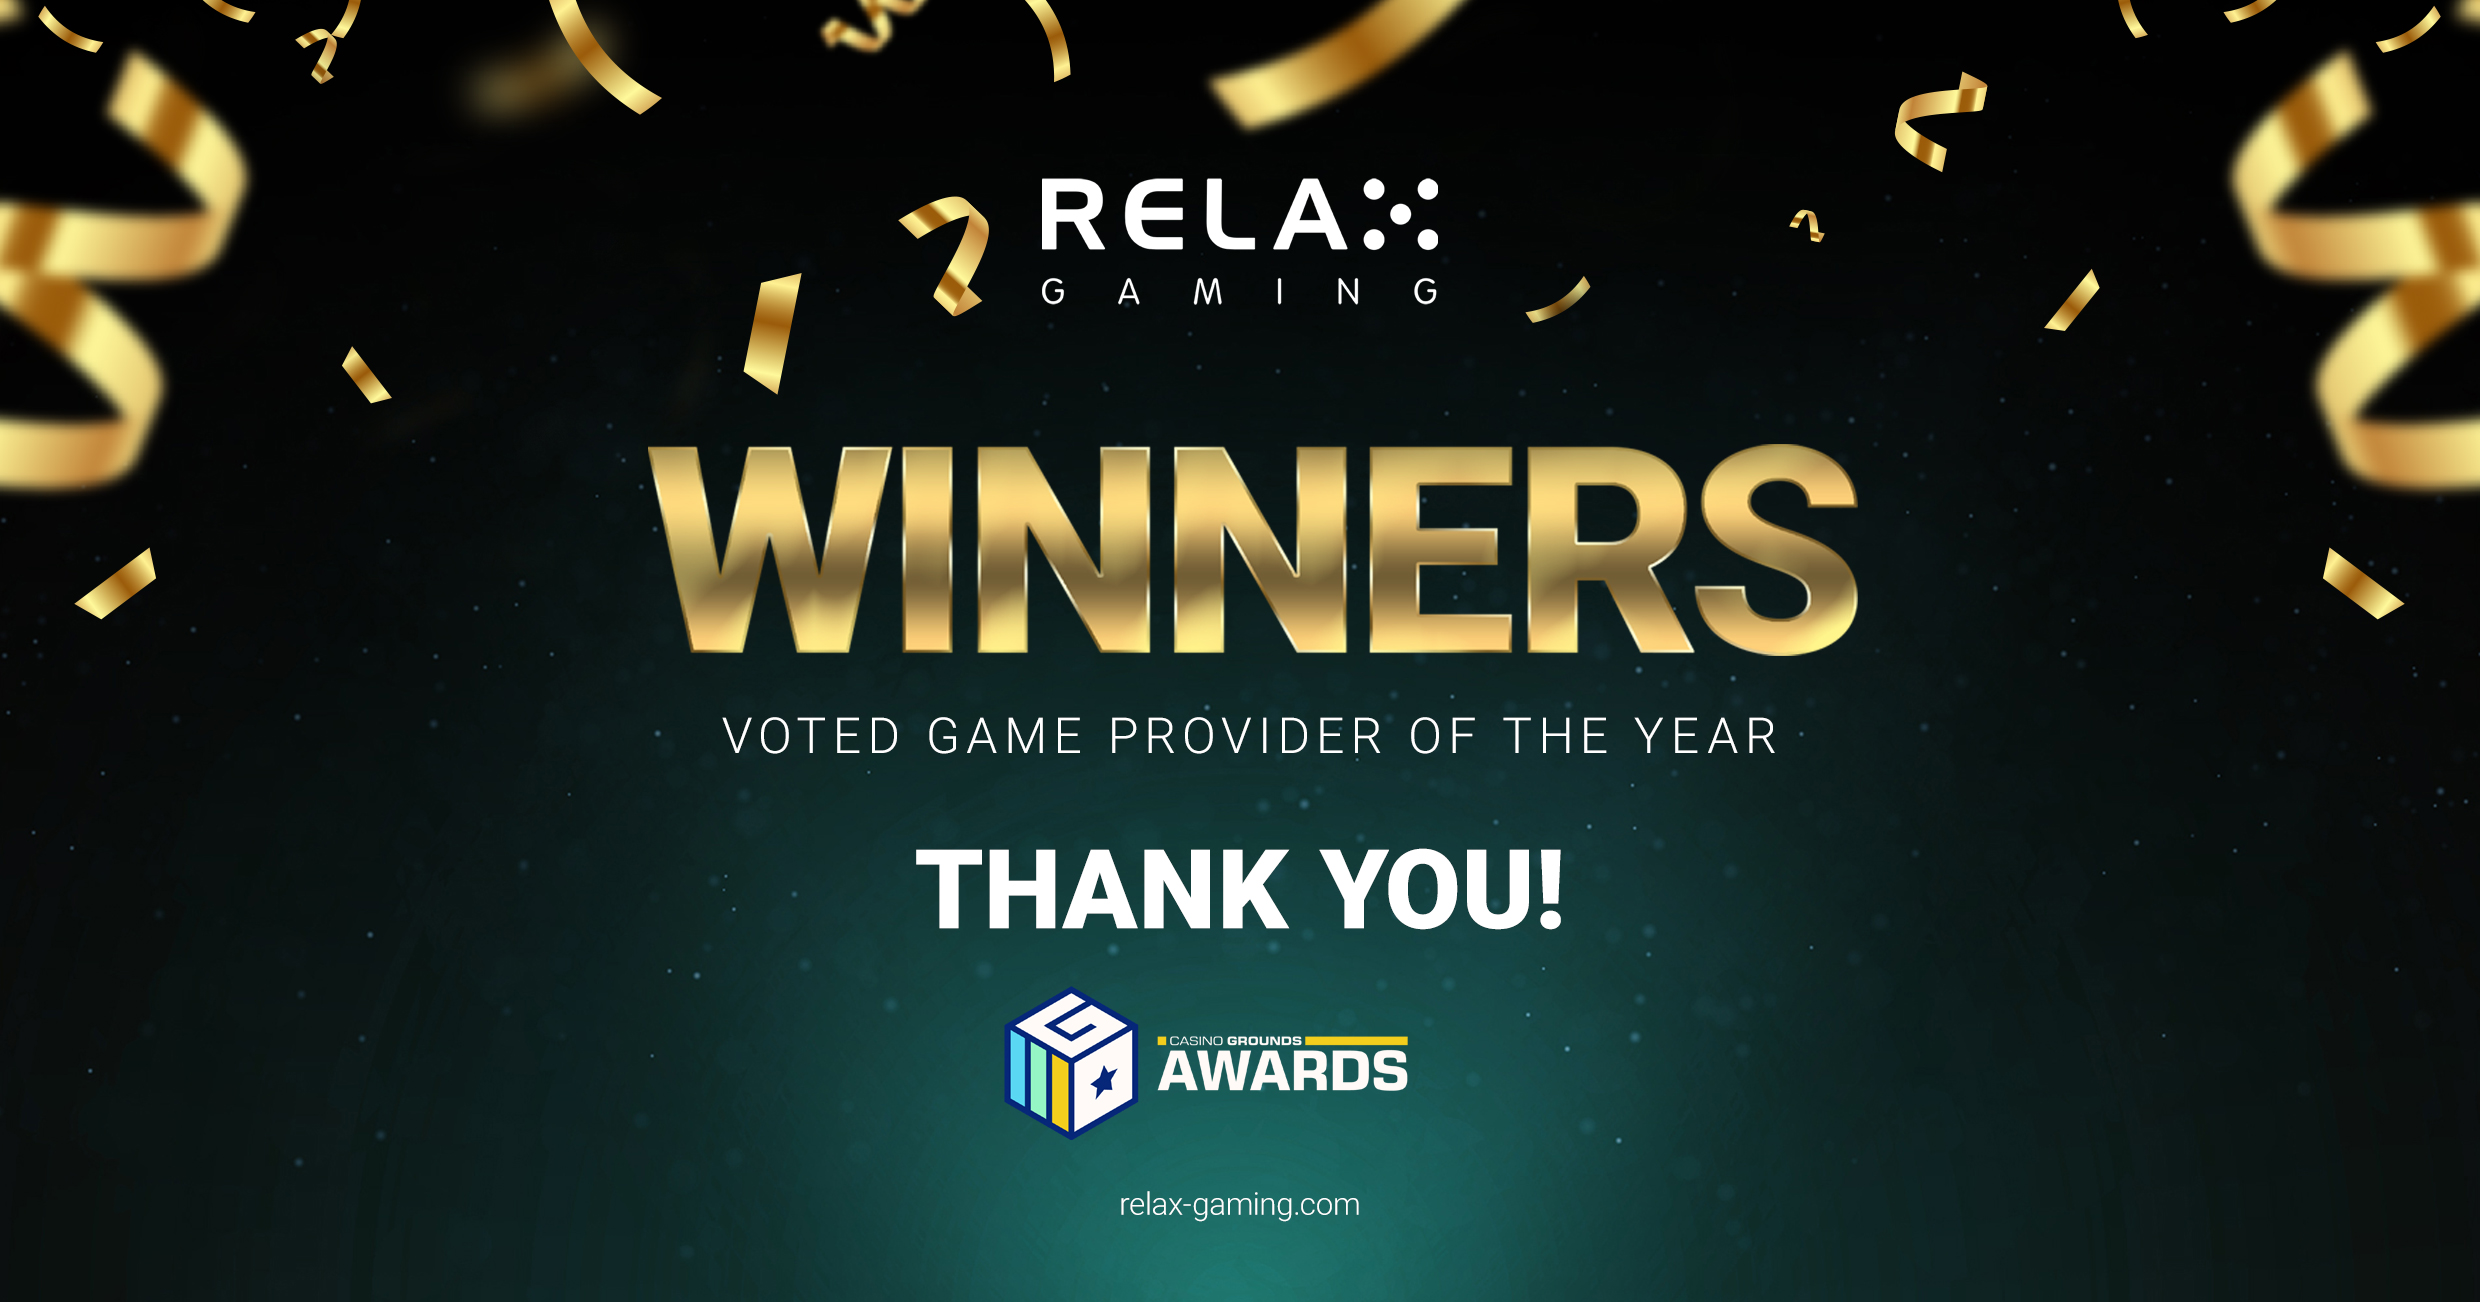 Relax Gaming voted Game Provider of the Year 2019 on Casino Grounds